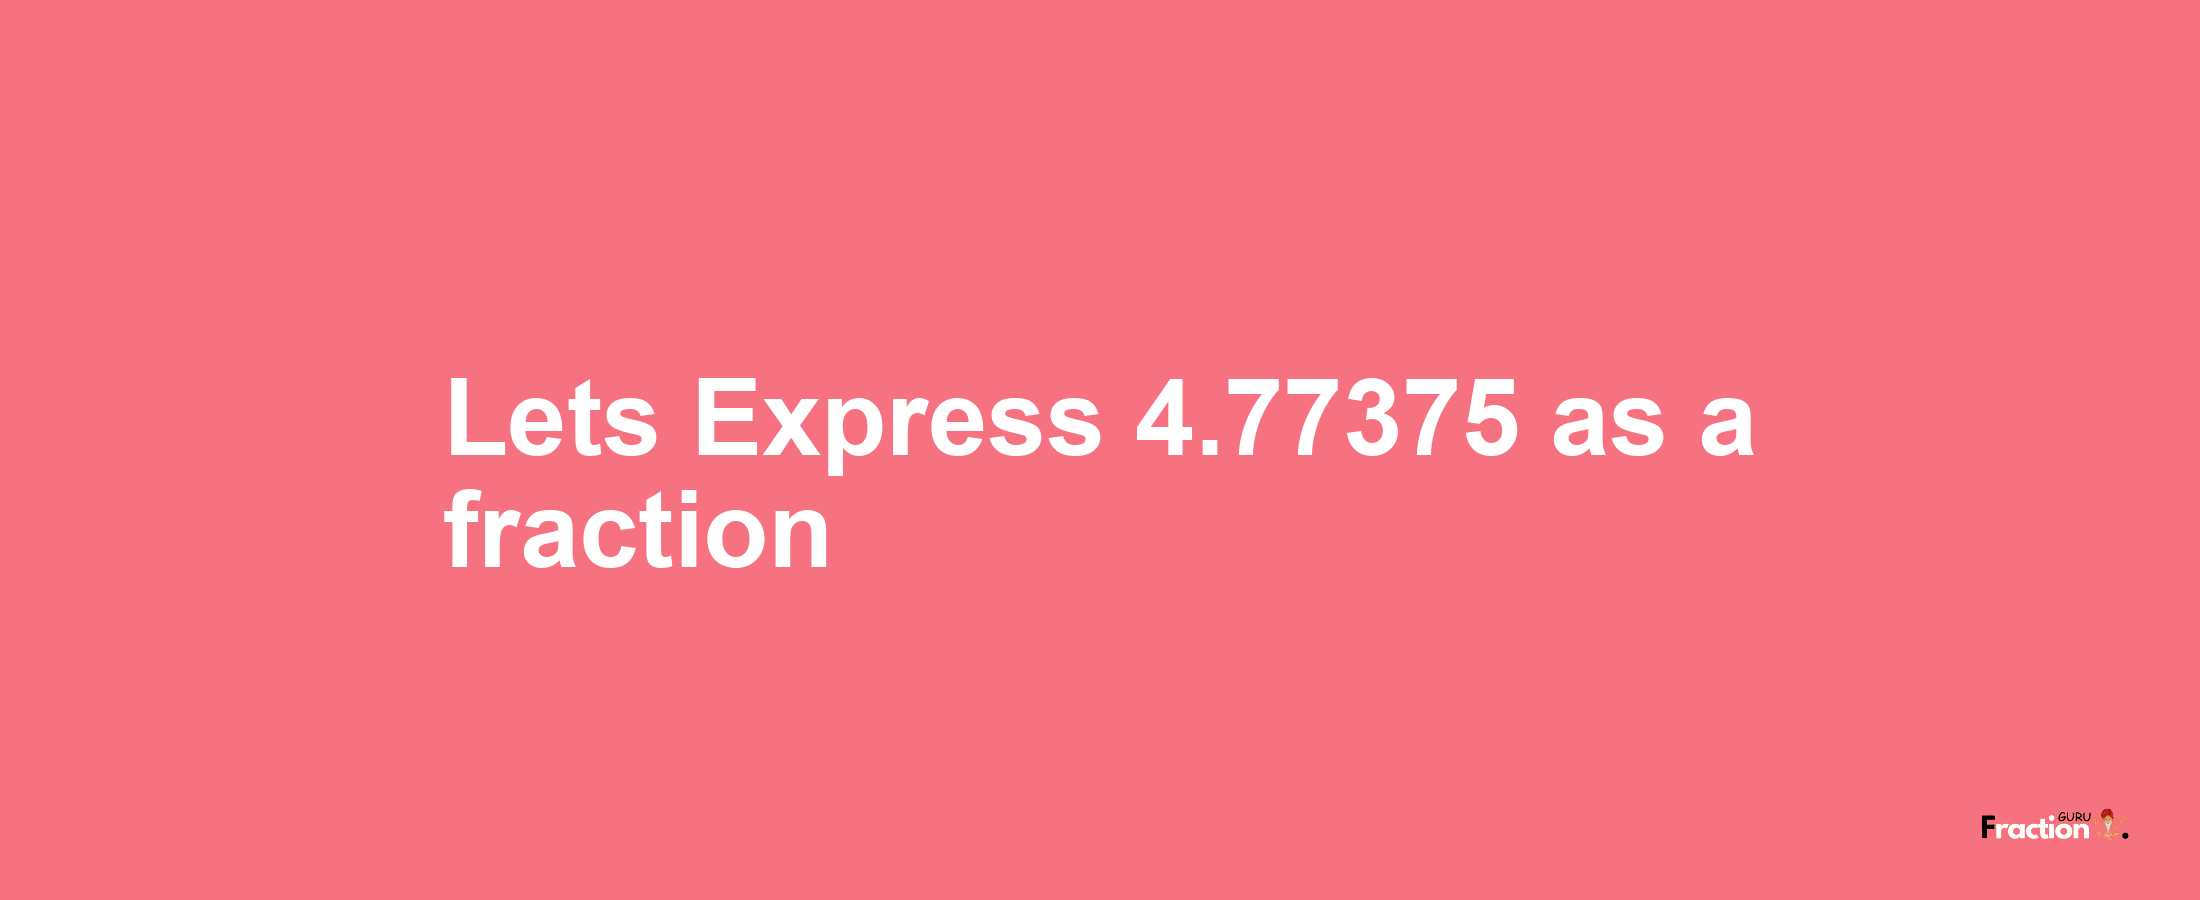 Lets Express 4.77375 as afraction